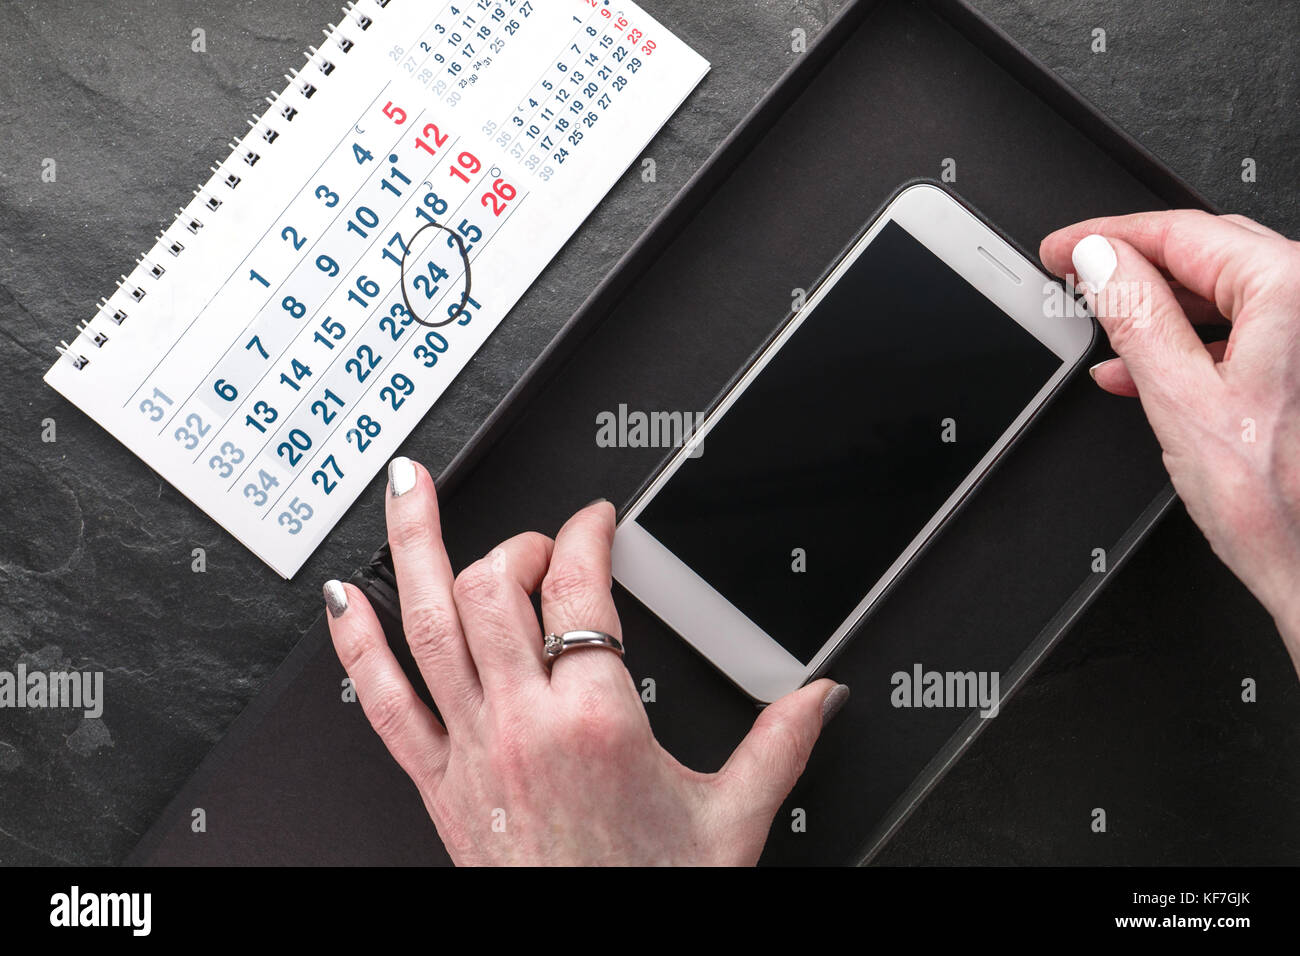 Calendar, black box and phone in hands view from above horizontal Stock Photo